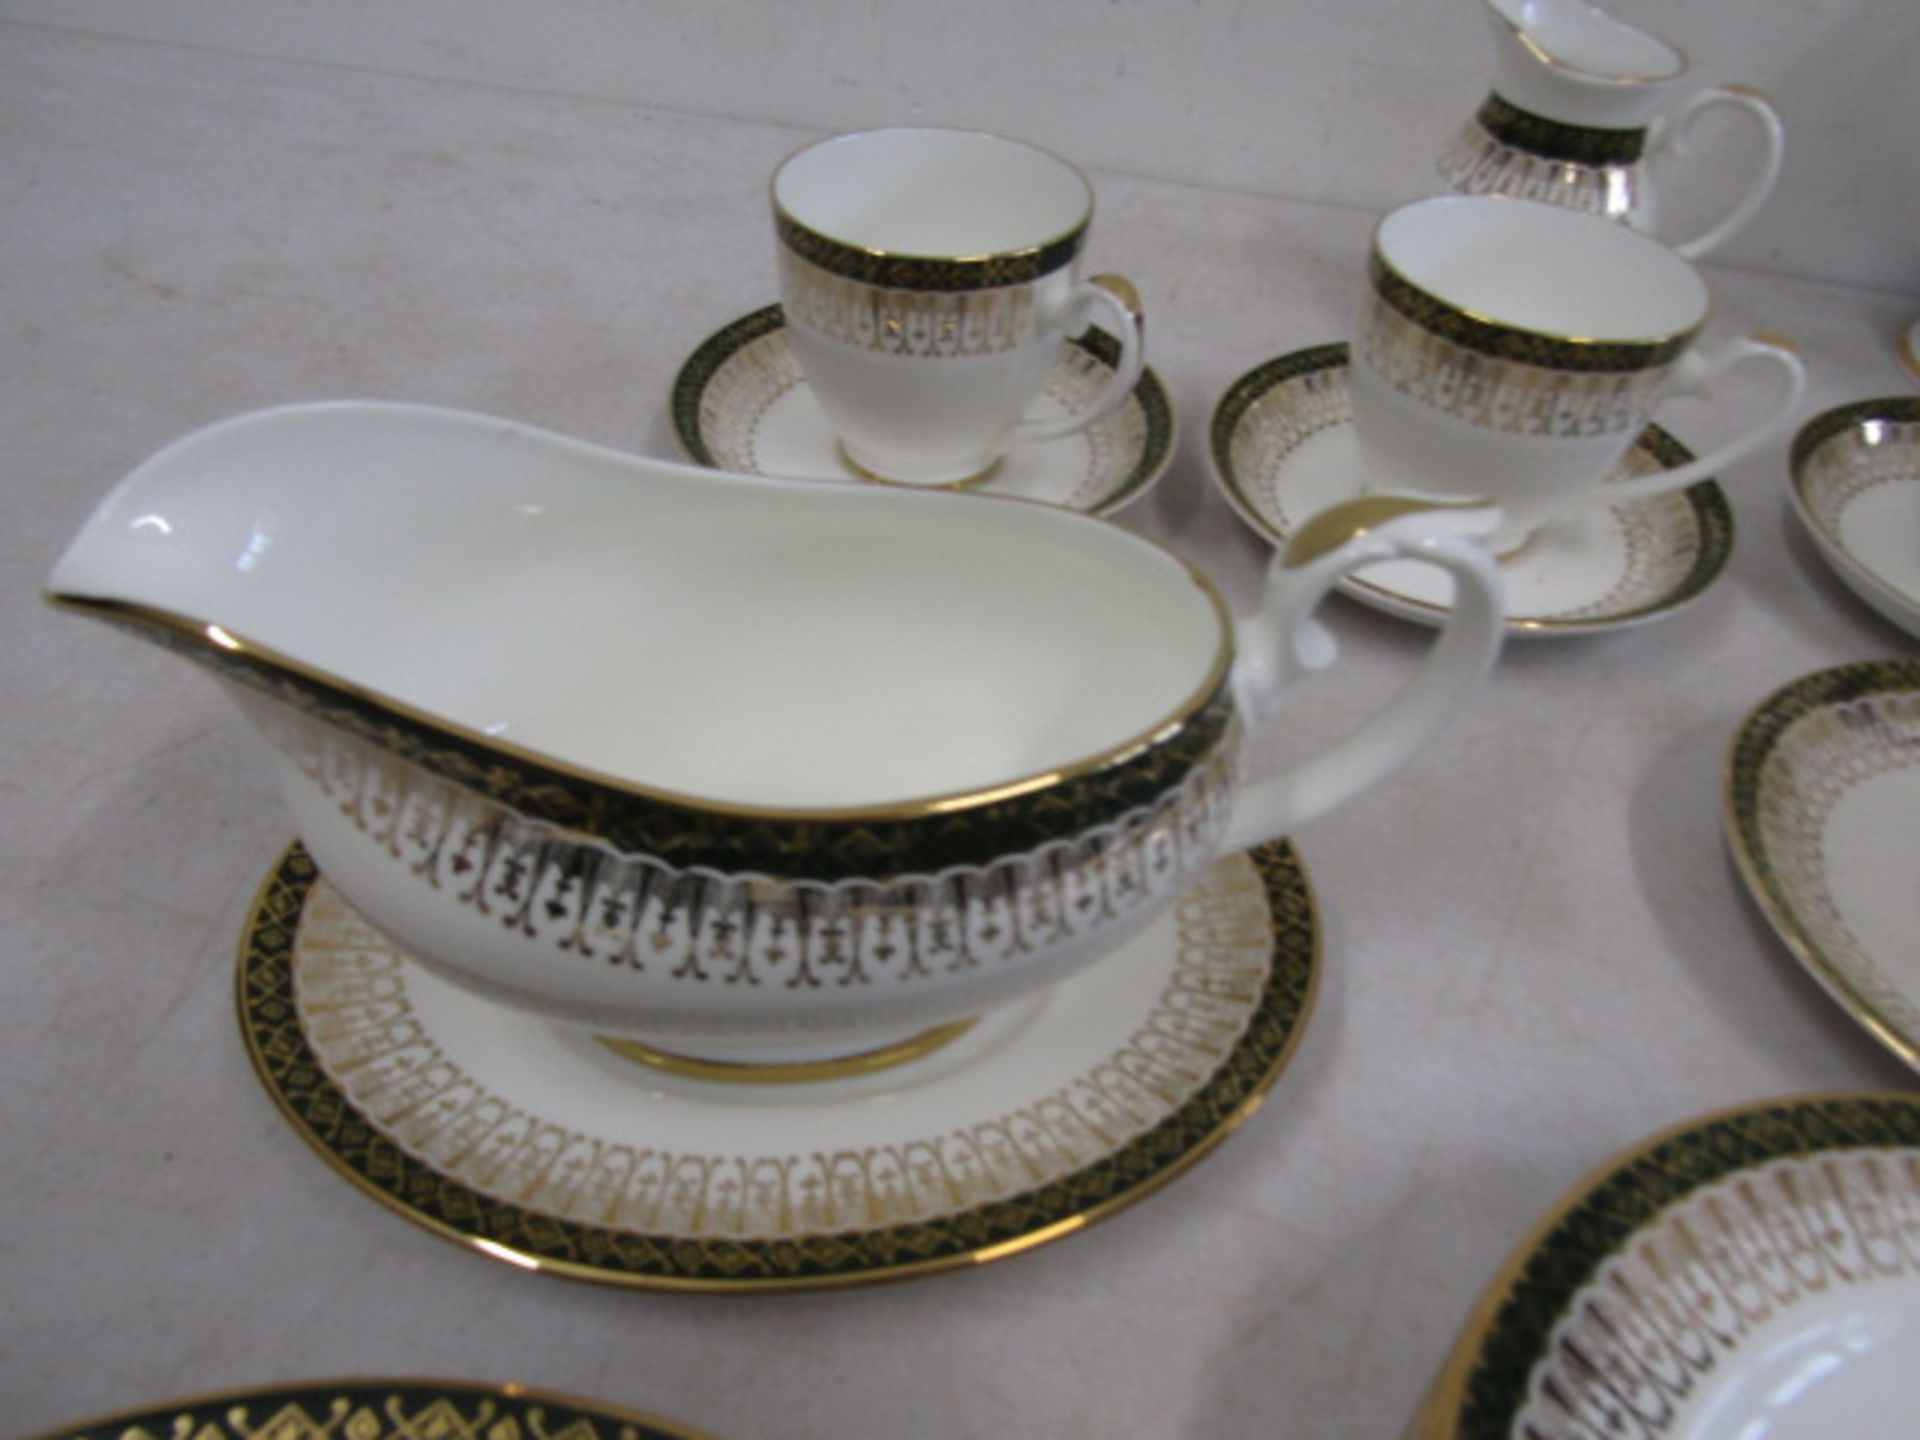 Royal Doulton 'Majestic' dinner service for 6 - Image 7 of 7